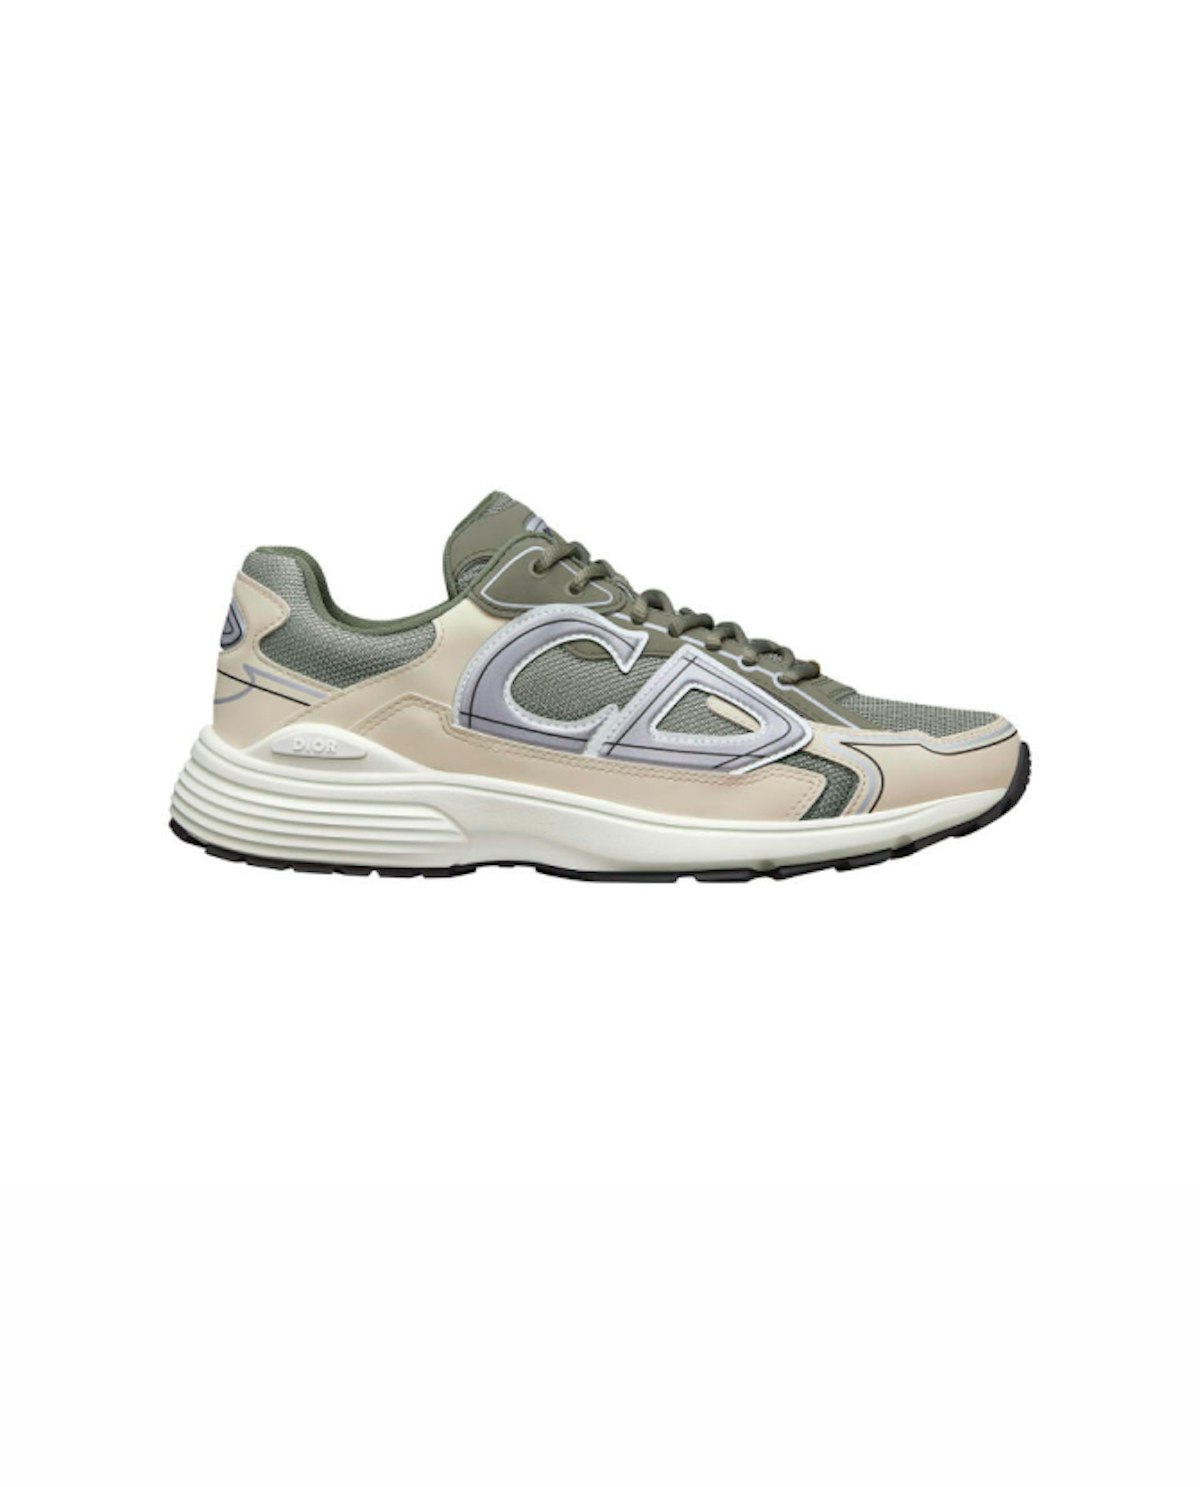 2021 Authentic B30 Designers Outdoor Shoes Grey Technical Mesh